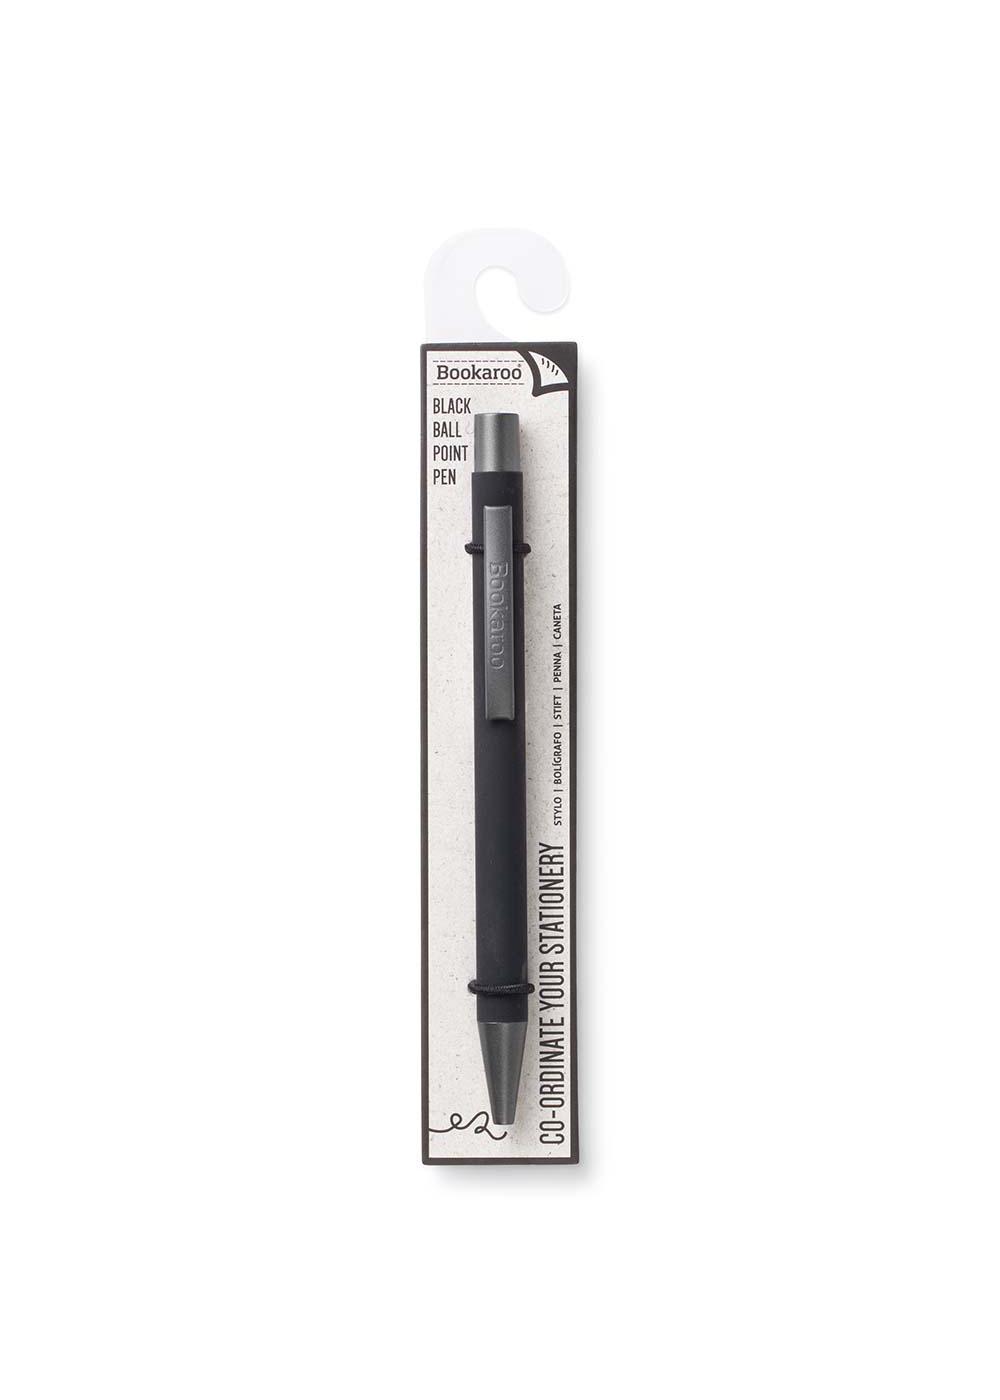 Bookaroo Retractable Ball Point Pen - Black Ink; image 1 of 3